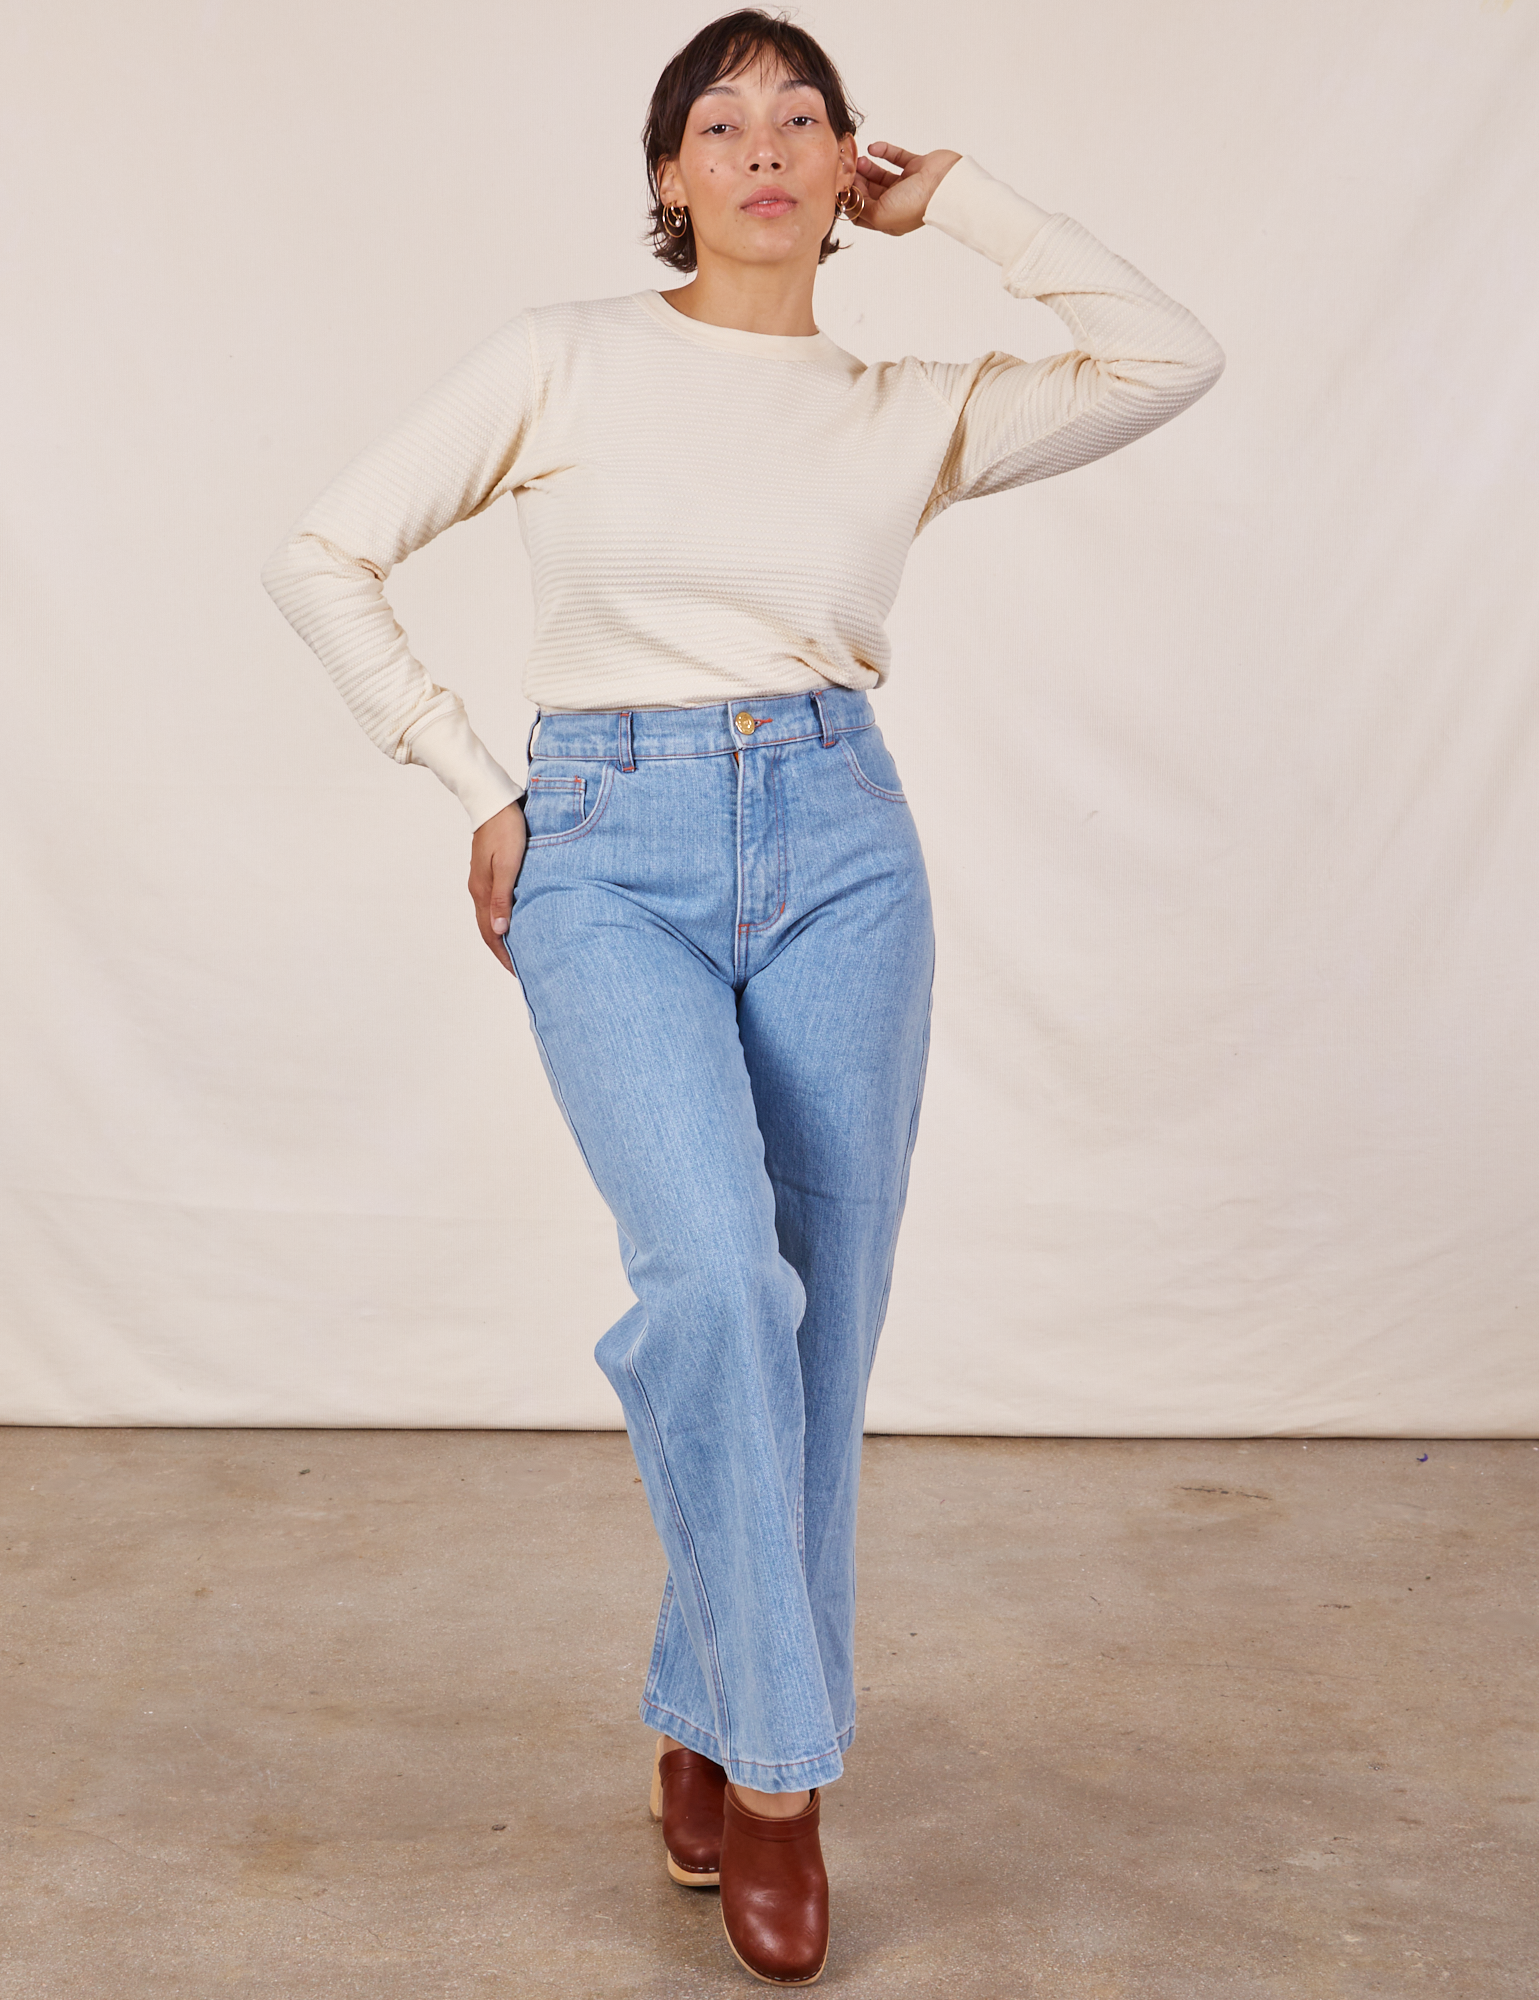 Tiara is wearing Honeycomb Thermal in Vintage Tee Off-White tucked into light wash Sailor Jeans